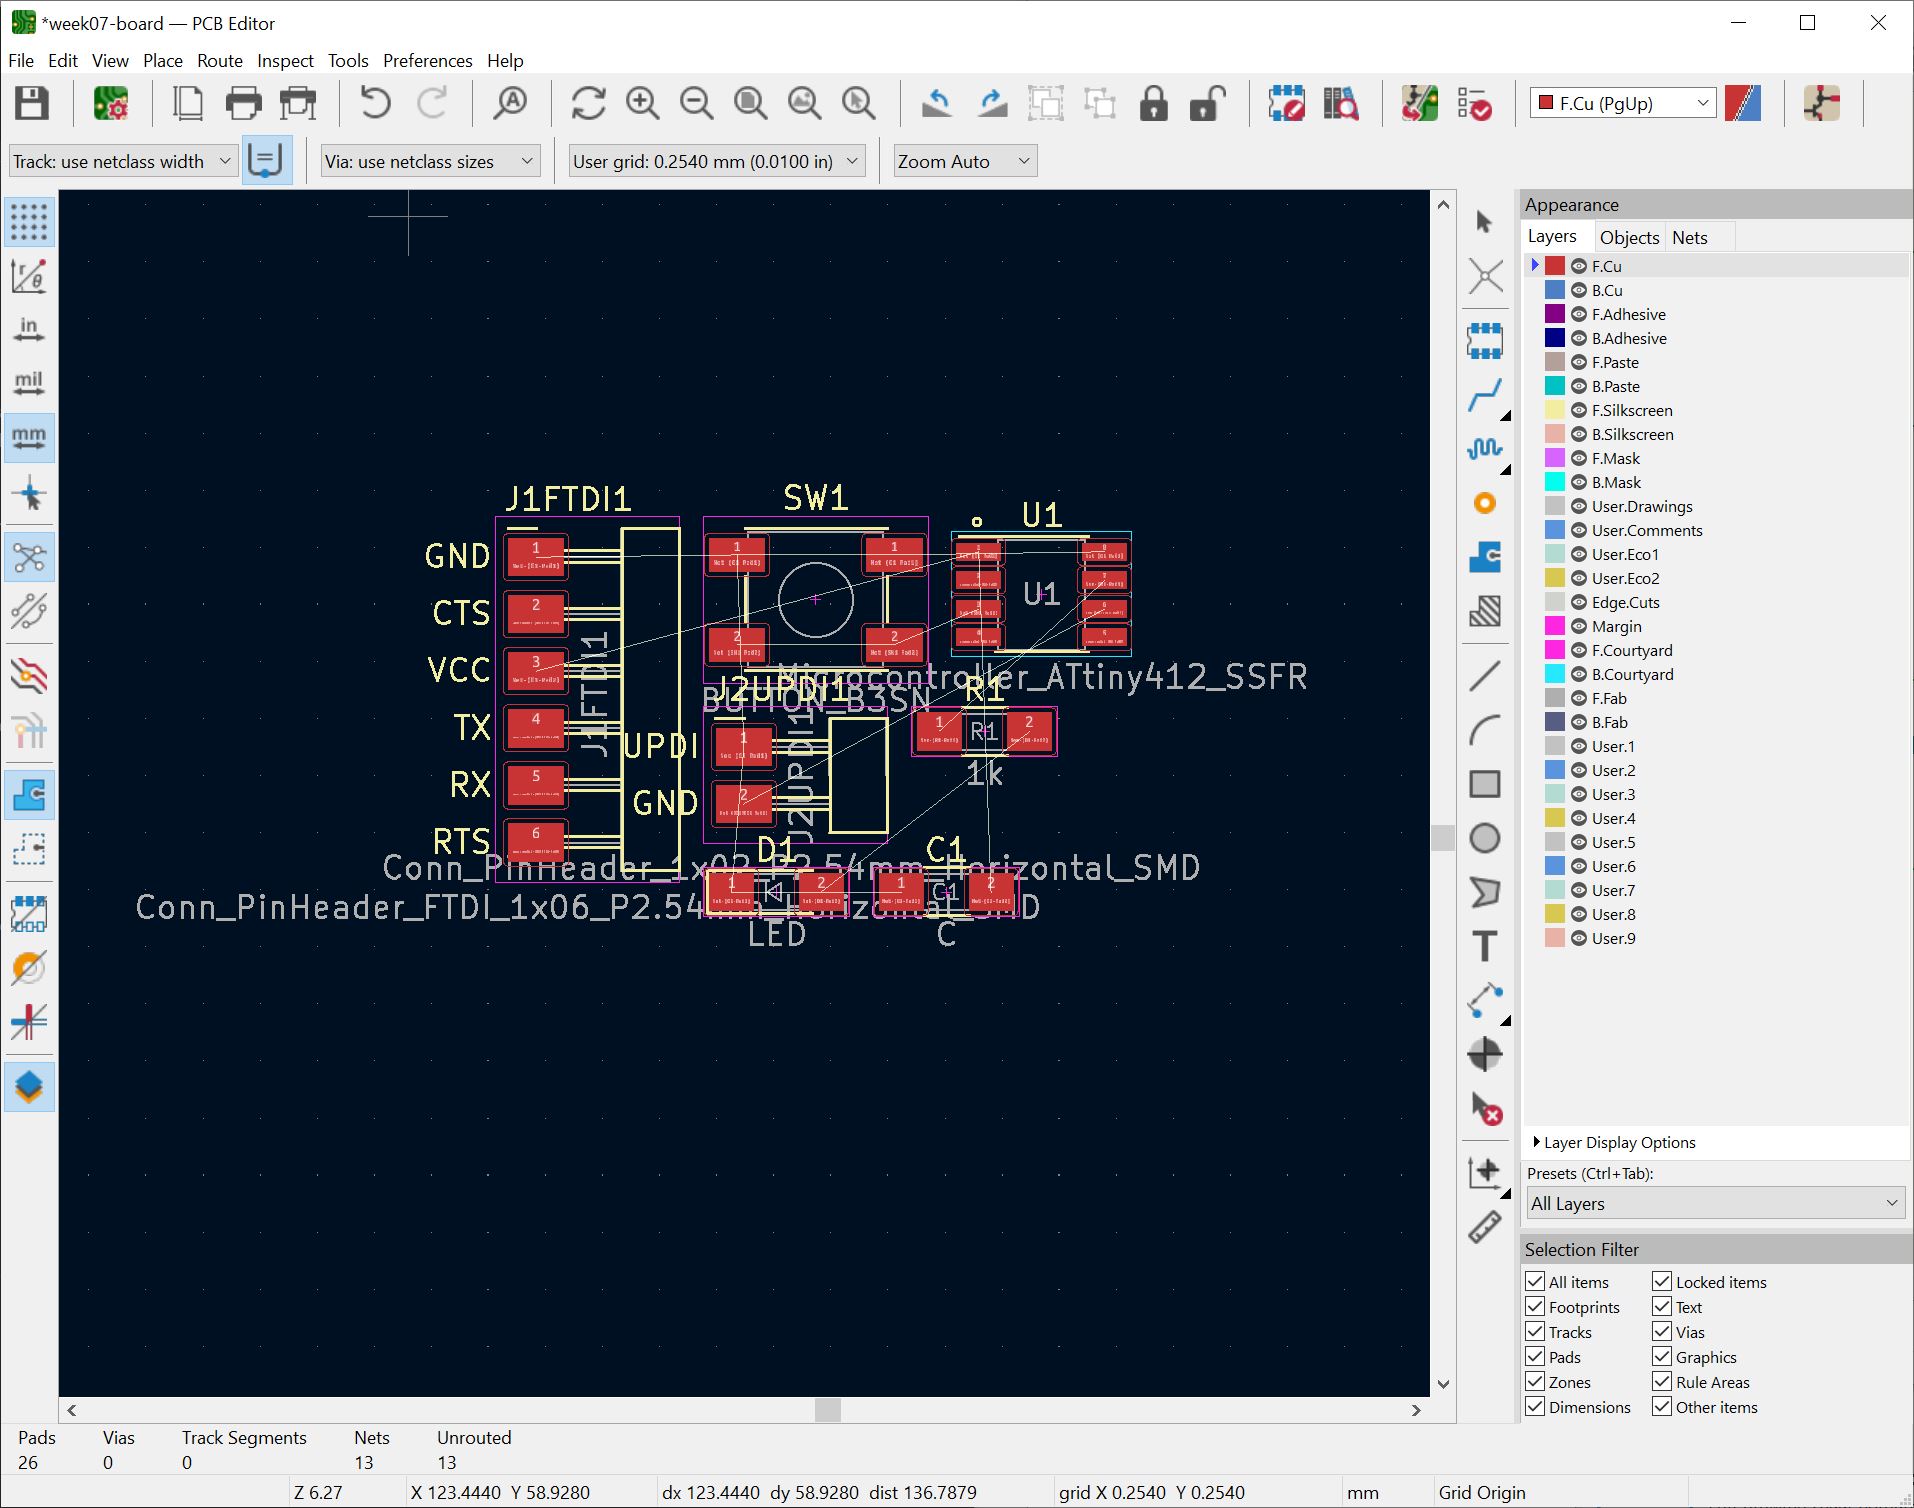 First look of the PCB